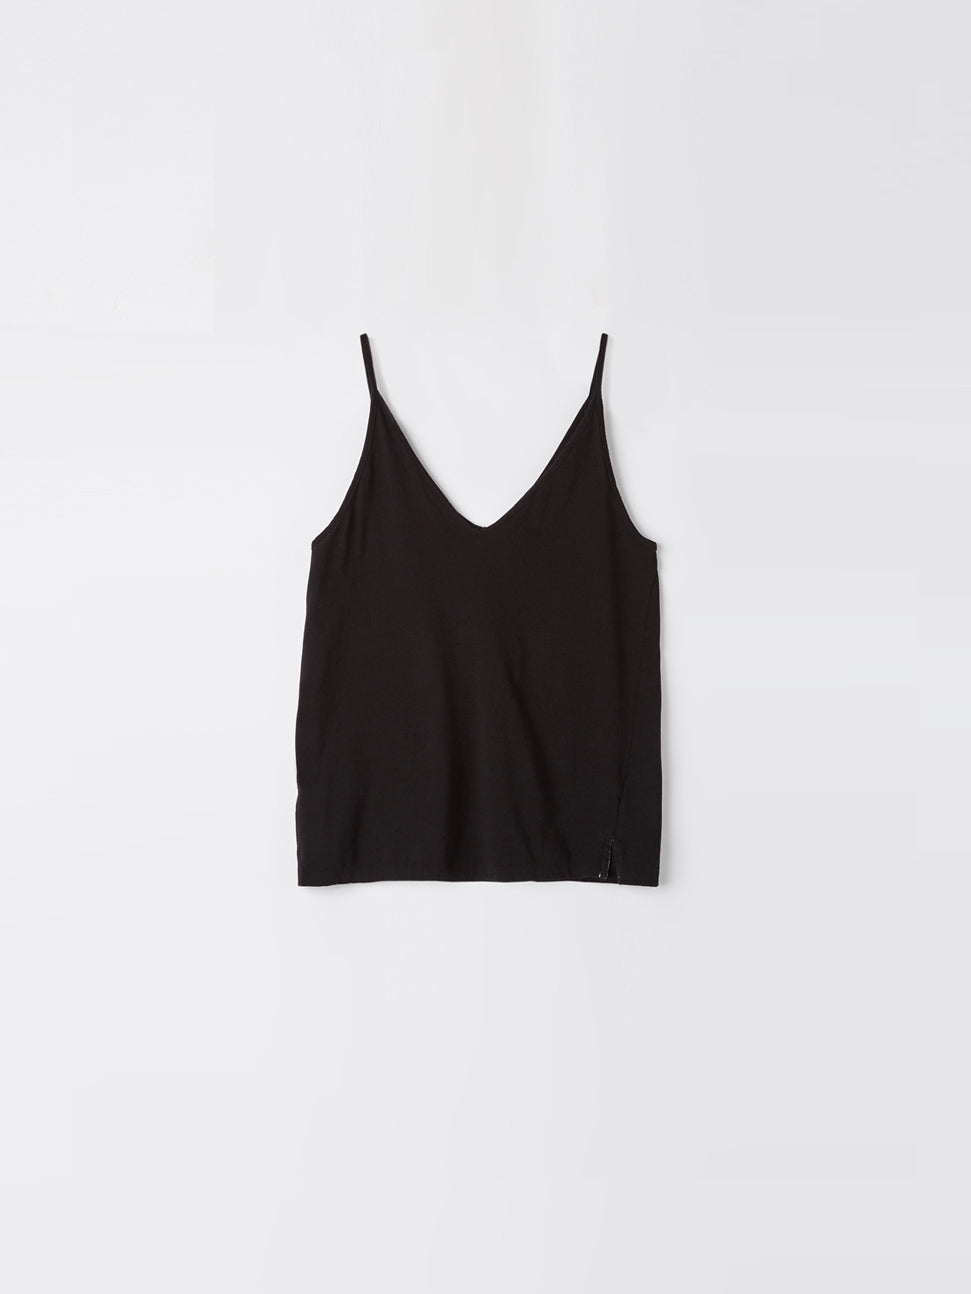 Sexy Cotton Camisole V Neck Tops For Women: Shape, Style, And Comfort From  Duixinju, $7.55